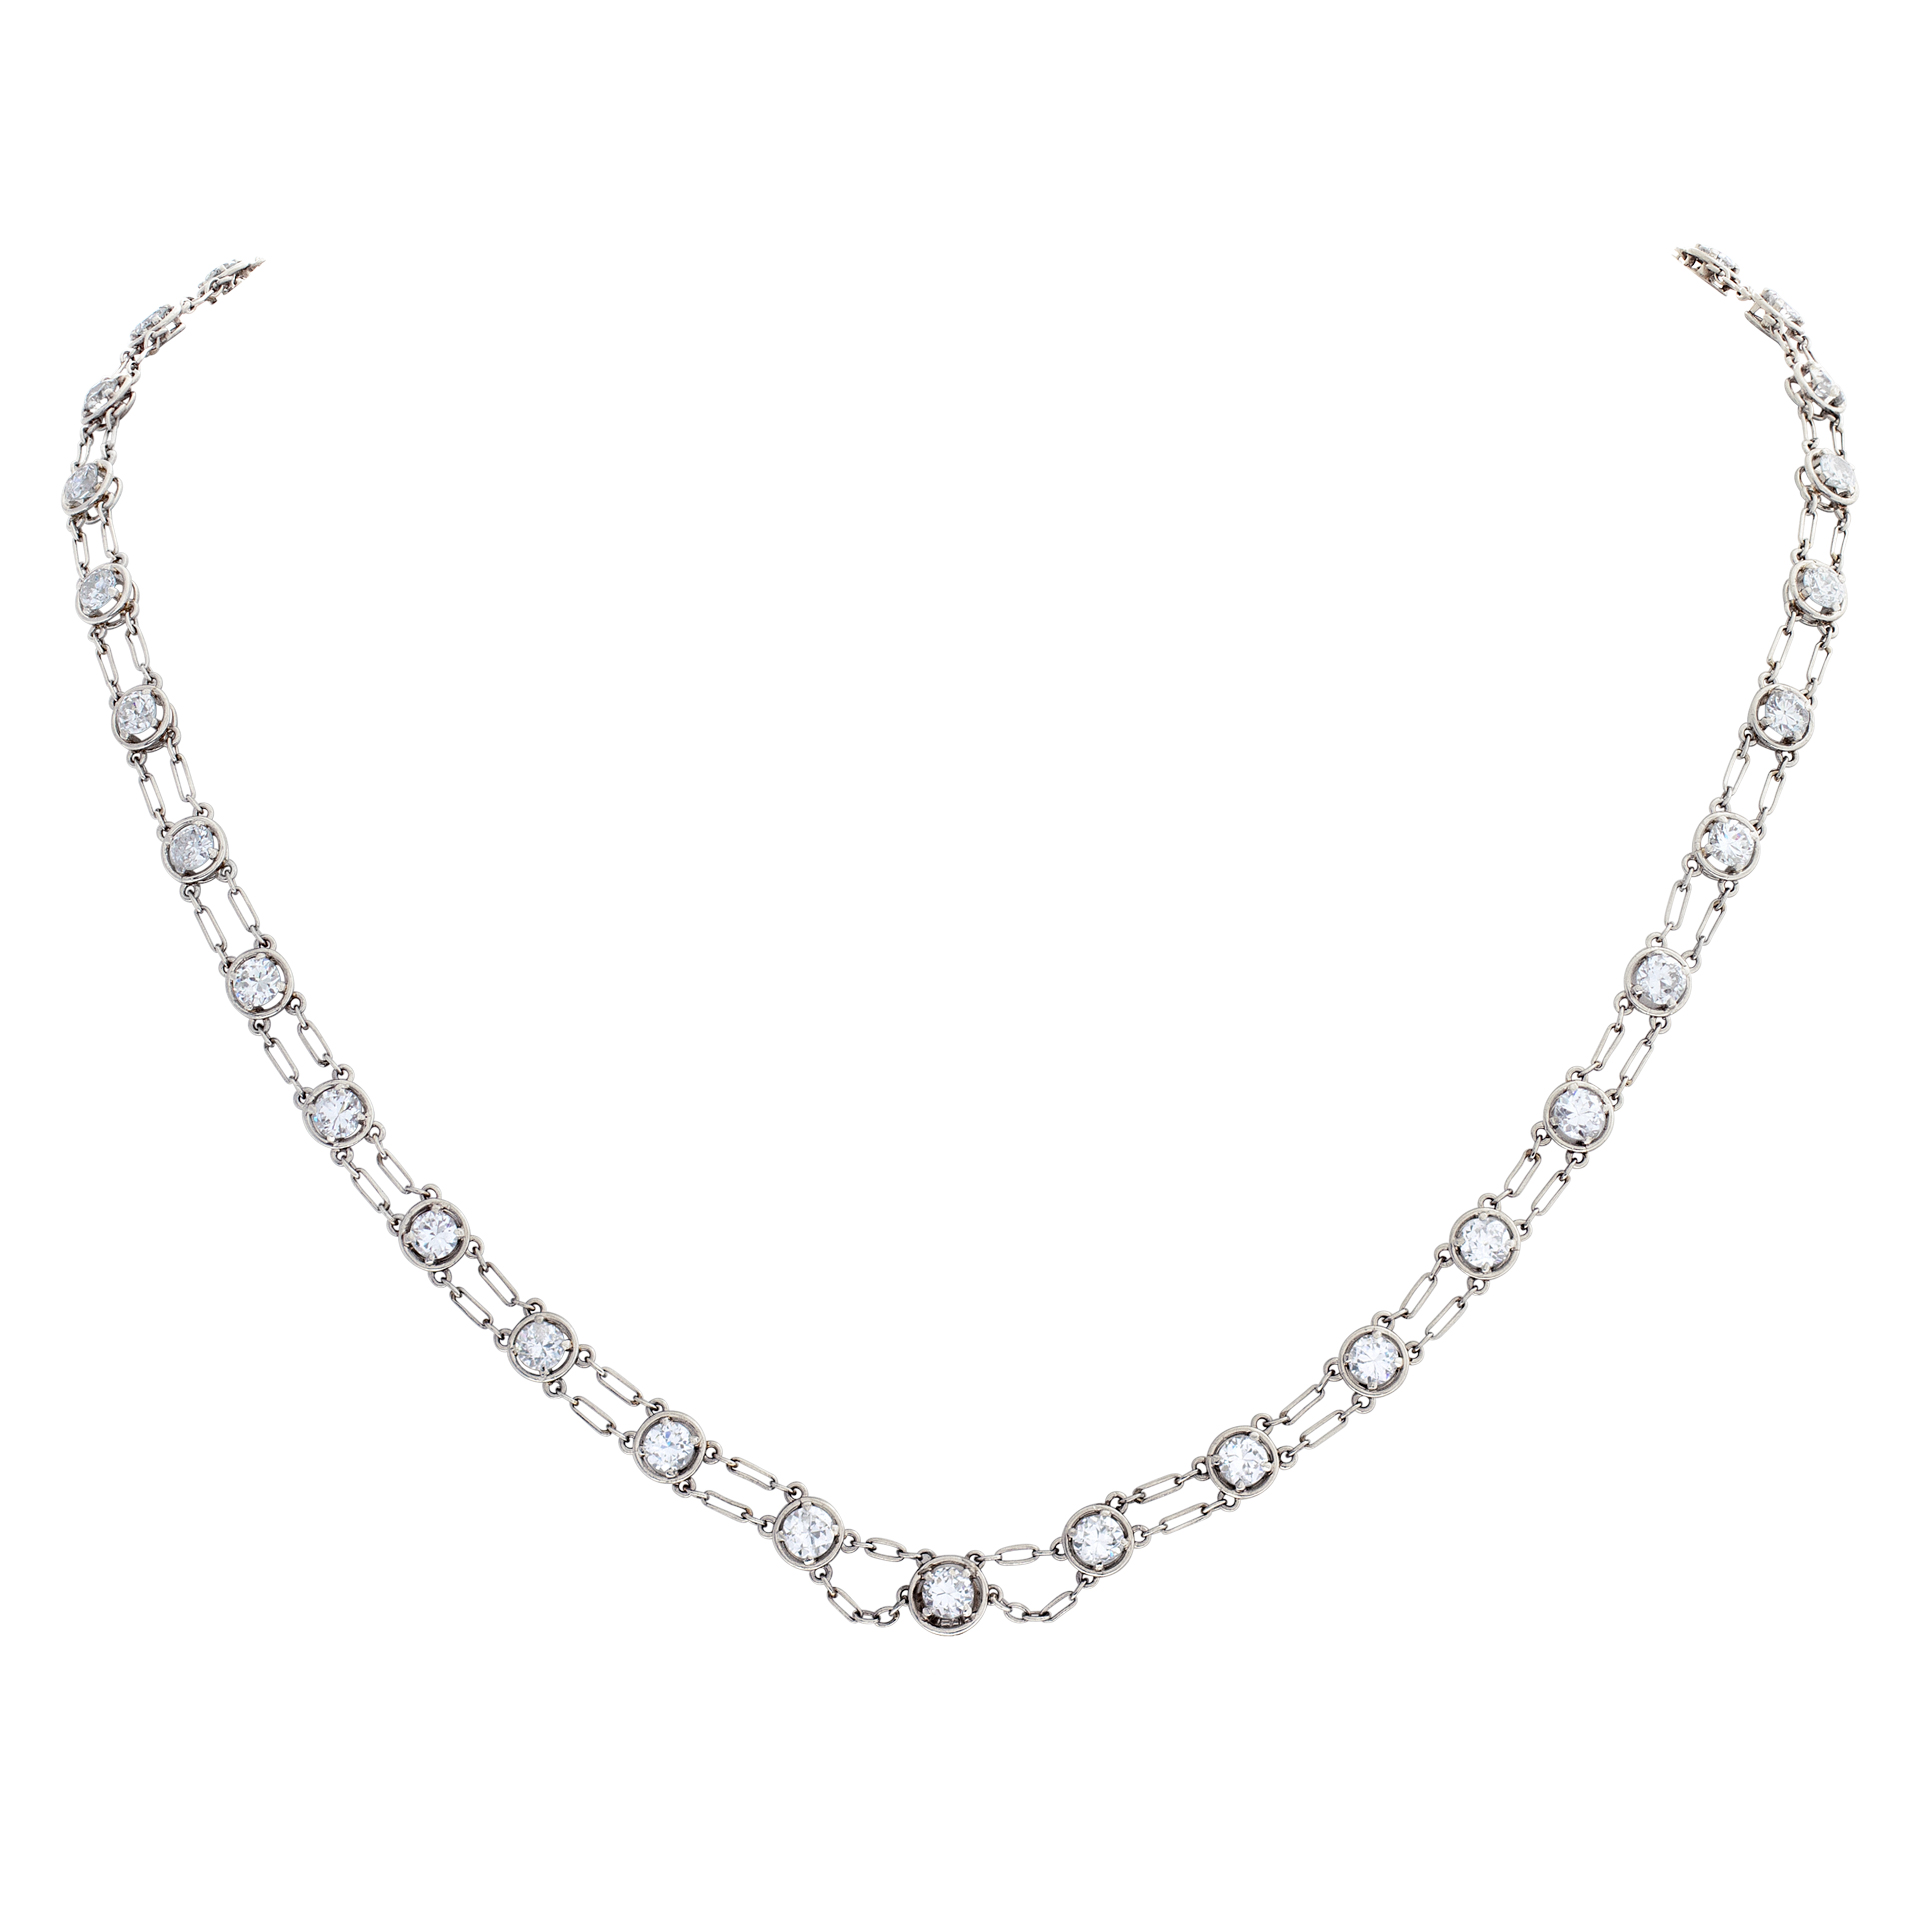 Necklace with approximately 6 carats diamonds in platinum image 1